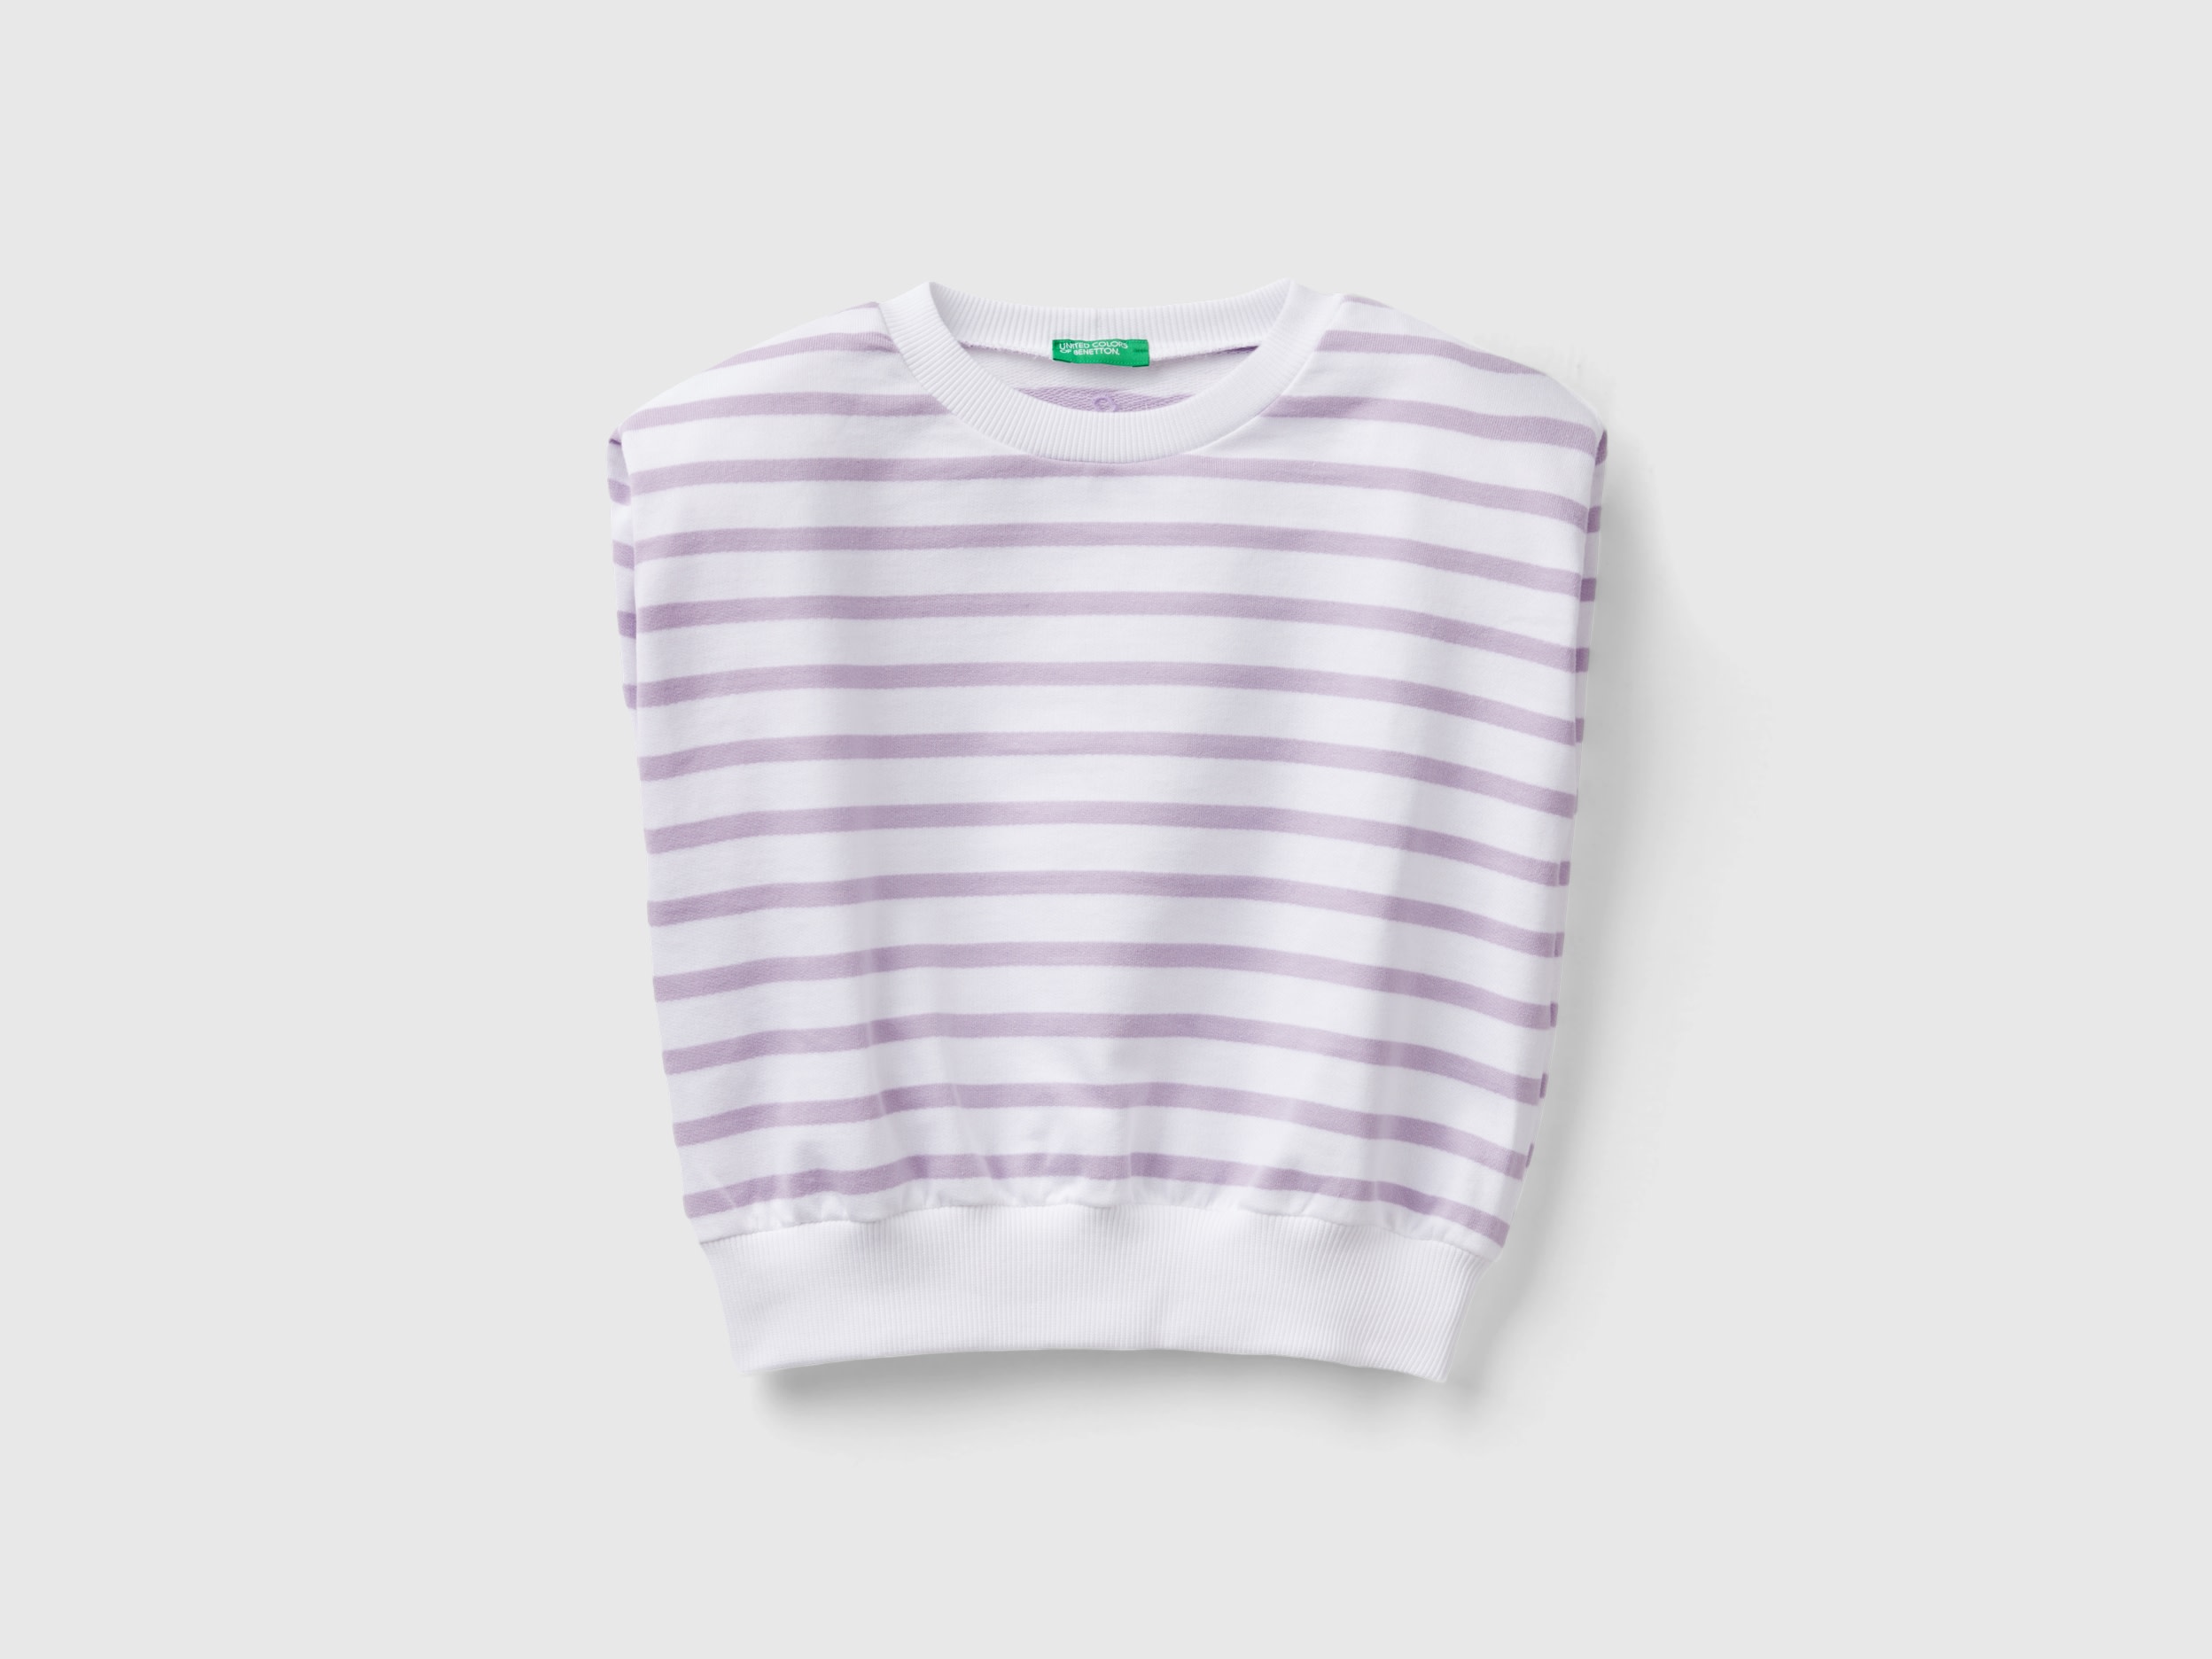 Benetton, Striped Top In Sweat Fabric, size XL, Lilac, Kids